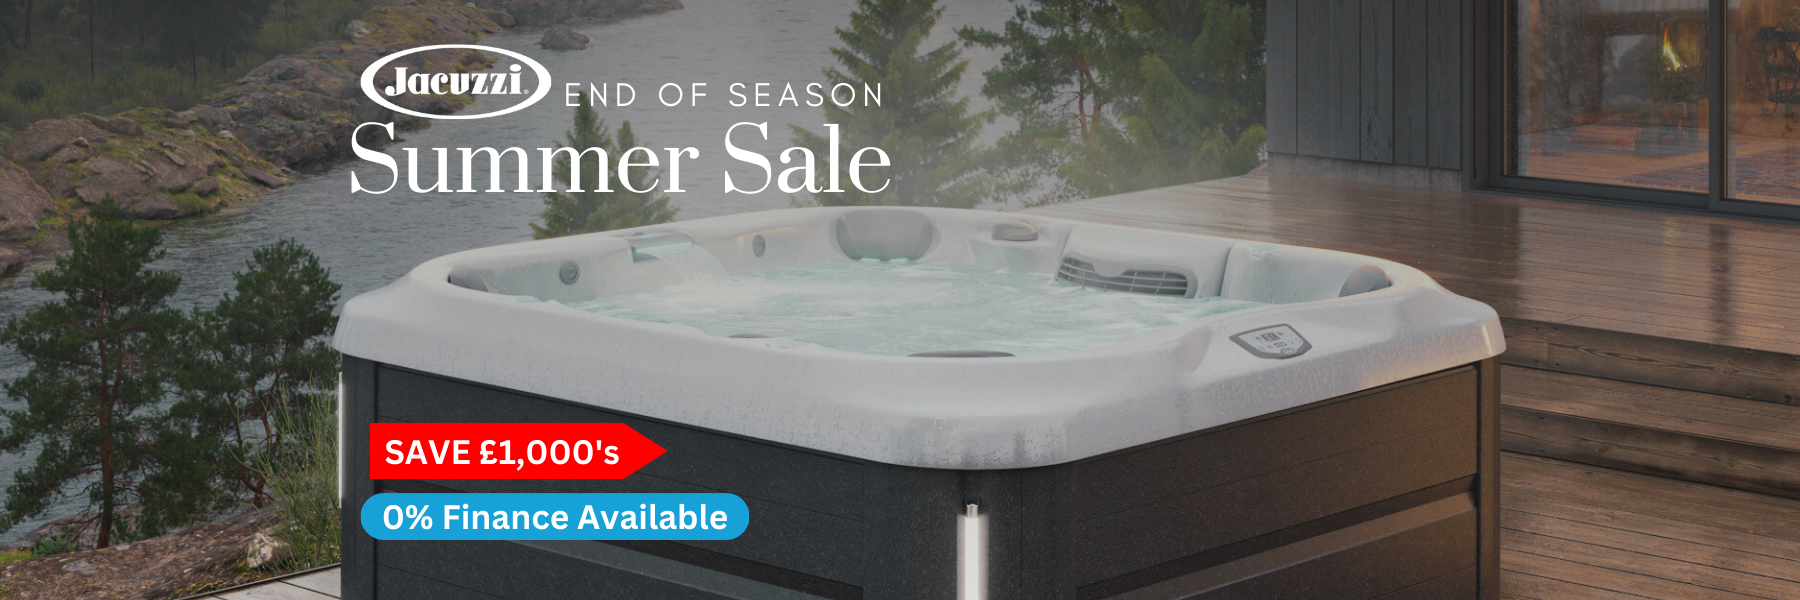 End_of_Season_Summer_Sale_Facebook_Post_1800_x_1000px_1800_x_600px_4 - Hot Tub Liverpool